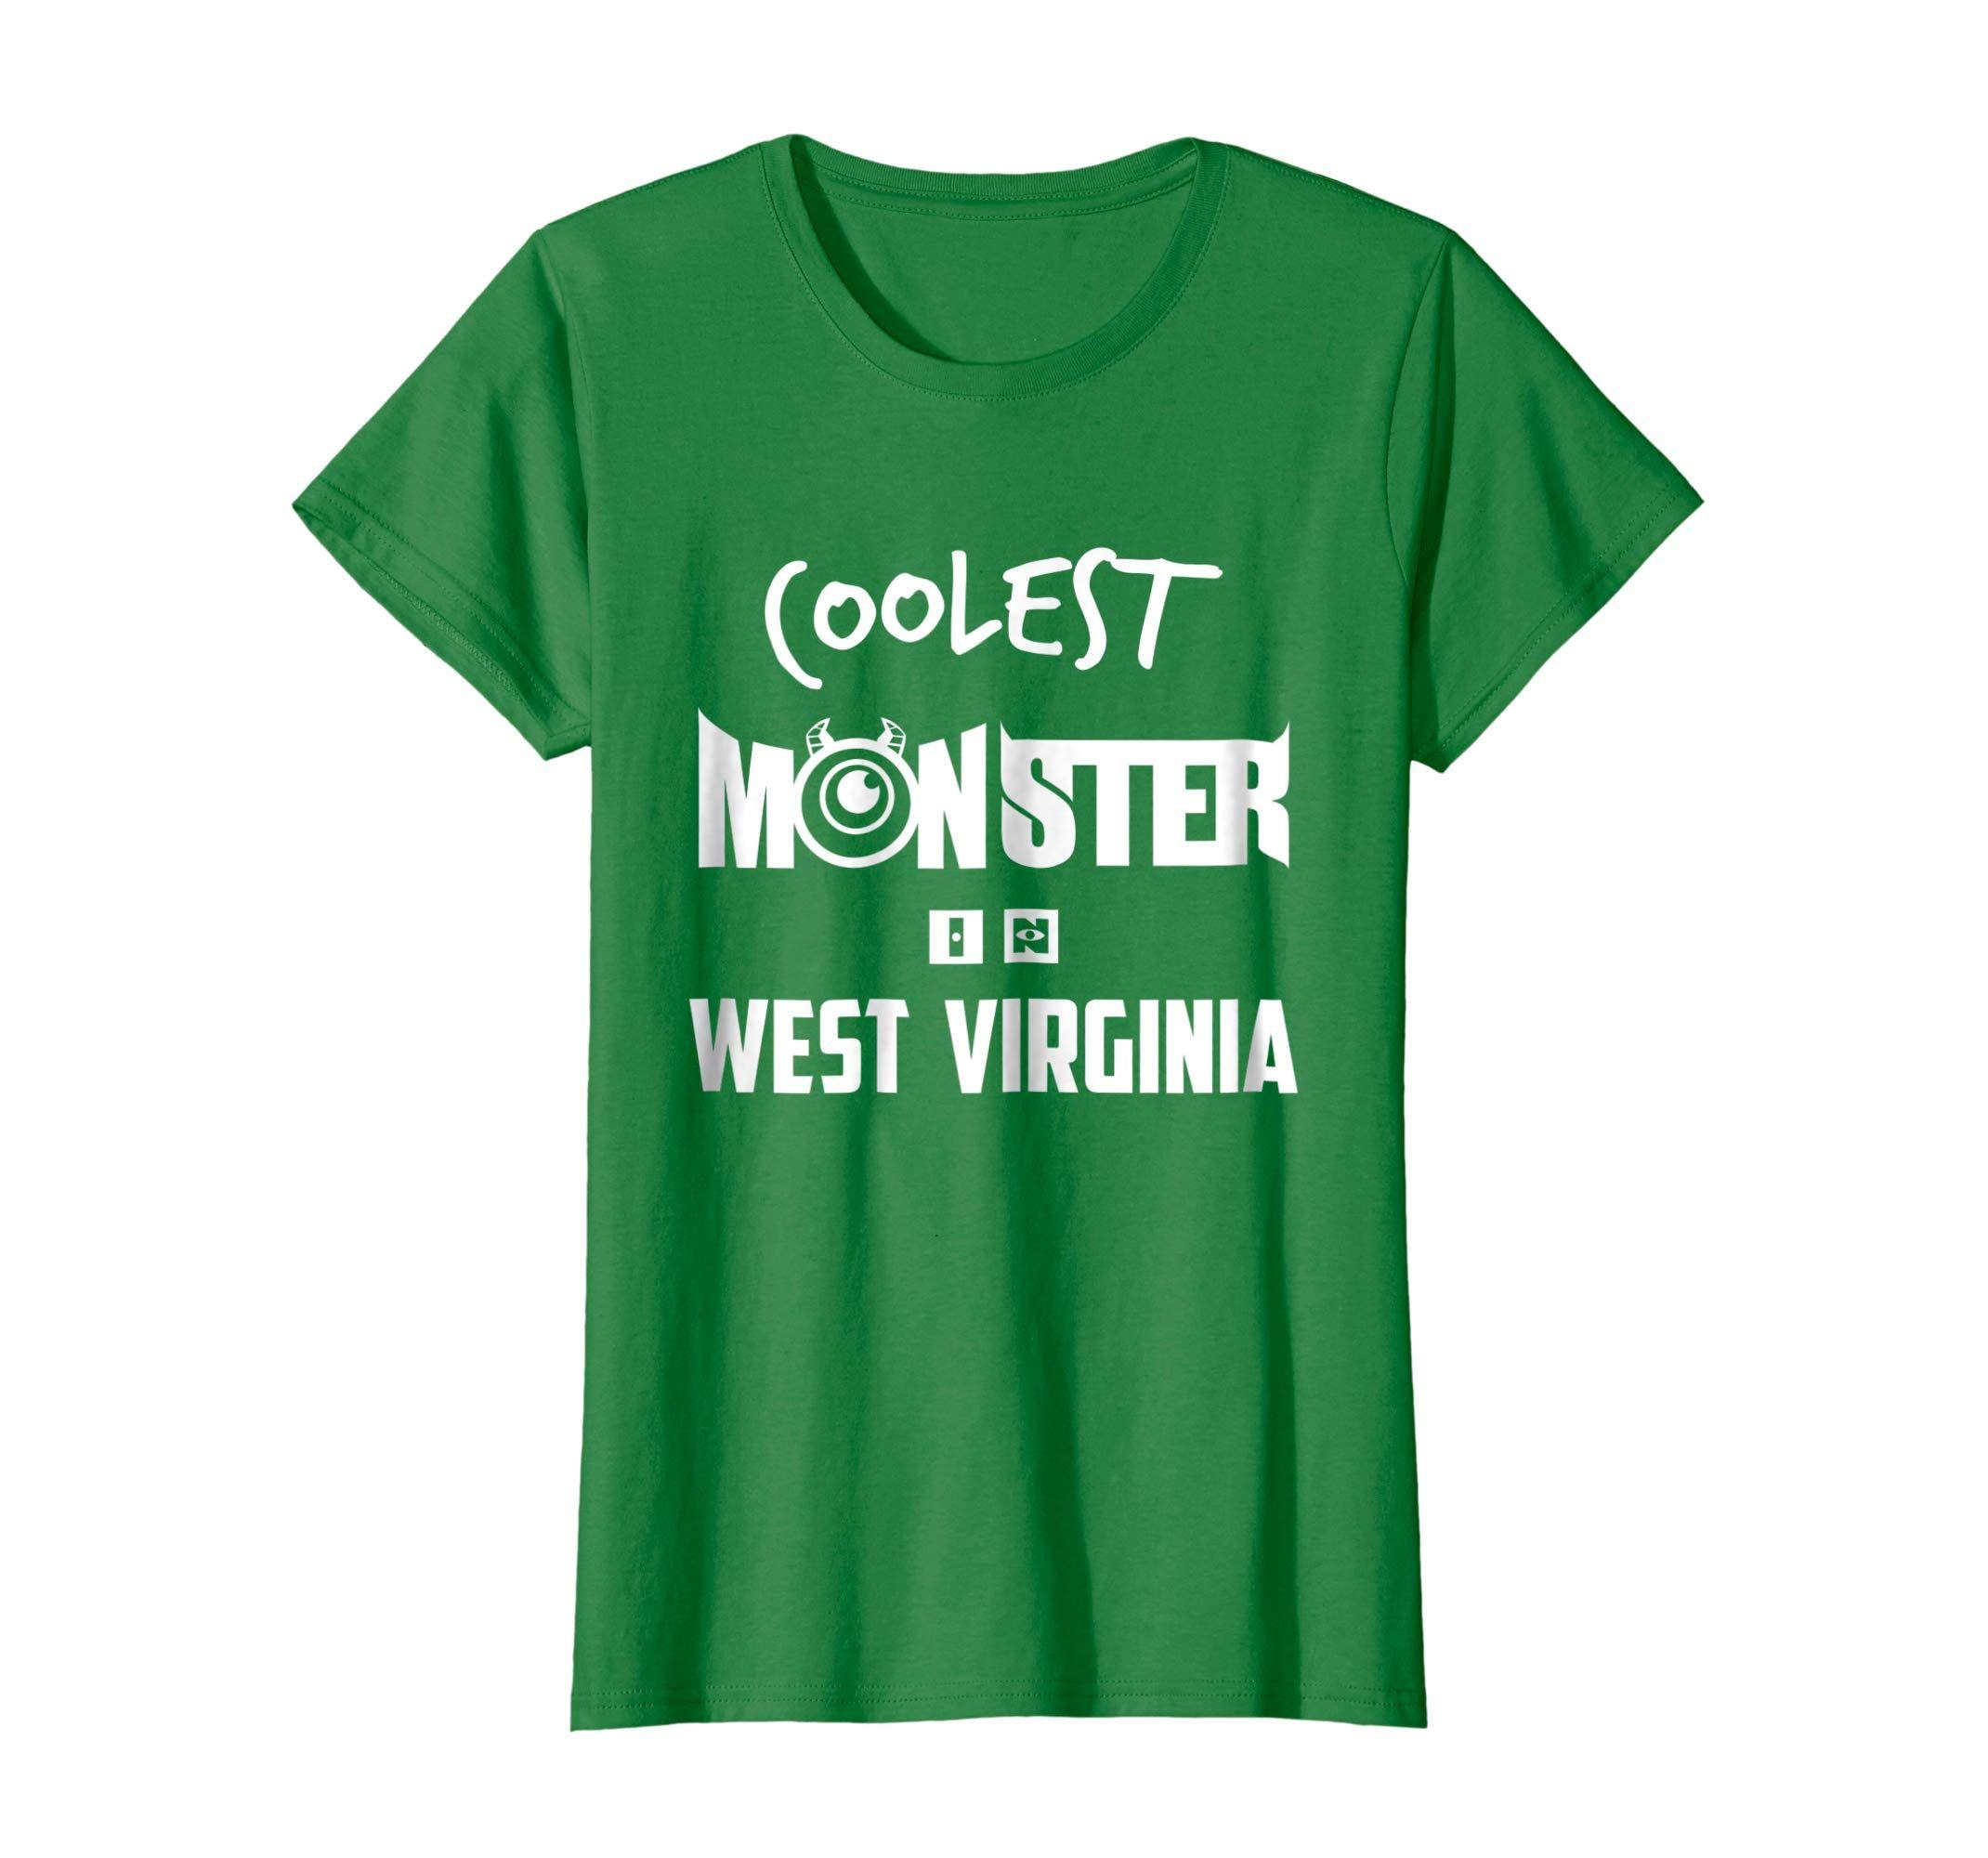 Cool WV Logo - Amazon.com: Coolest Monster In West Virginia T-Shirt: Clothing